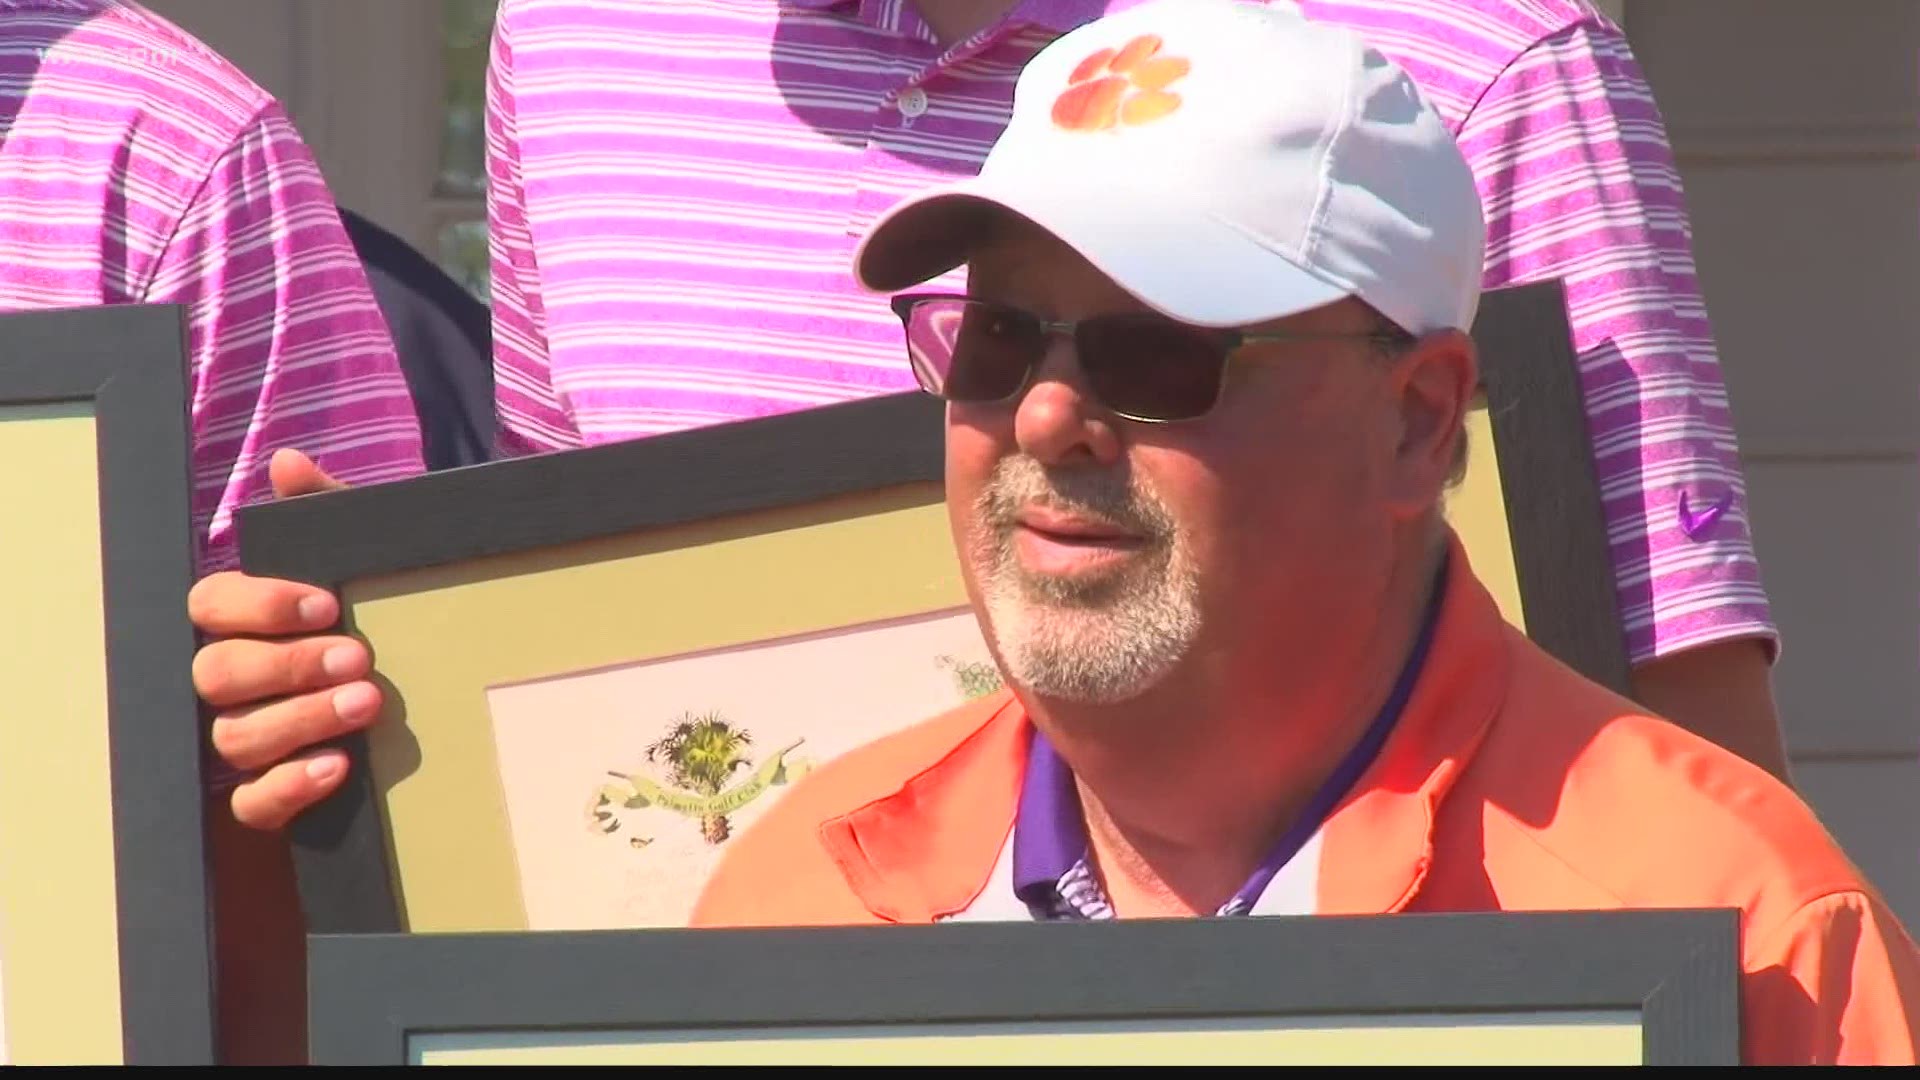 Clemson's Larry Penley, who is retiring at the end of the season, earned his 80th career victory as the Tigers won the Cleveland Golf Palmetto Intercollegiate.